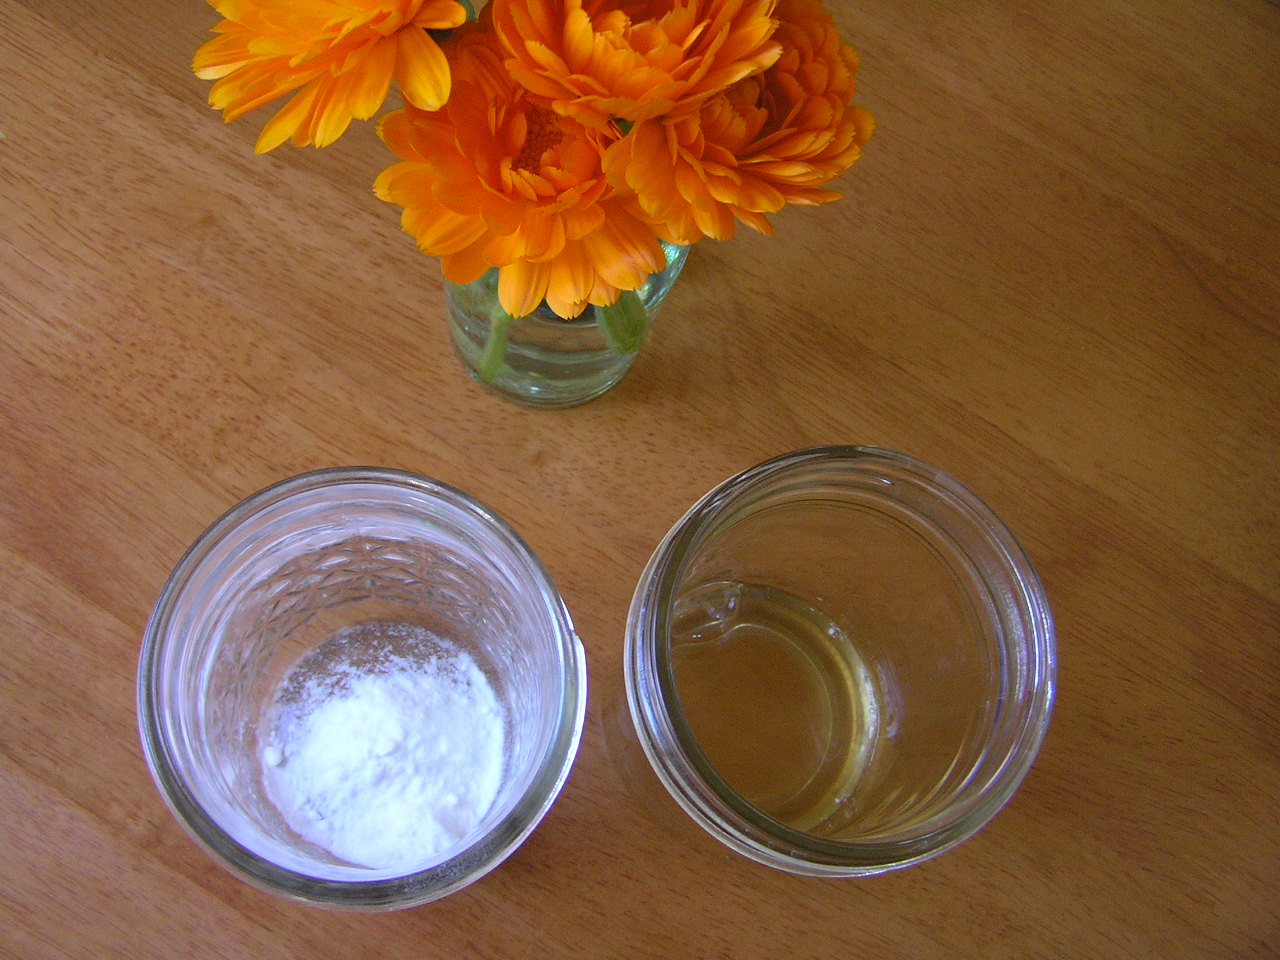 How To Use Baking Soda And Apple Cider Vinegar For Hair